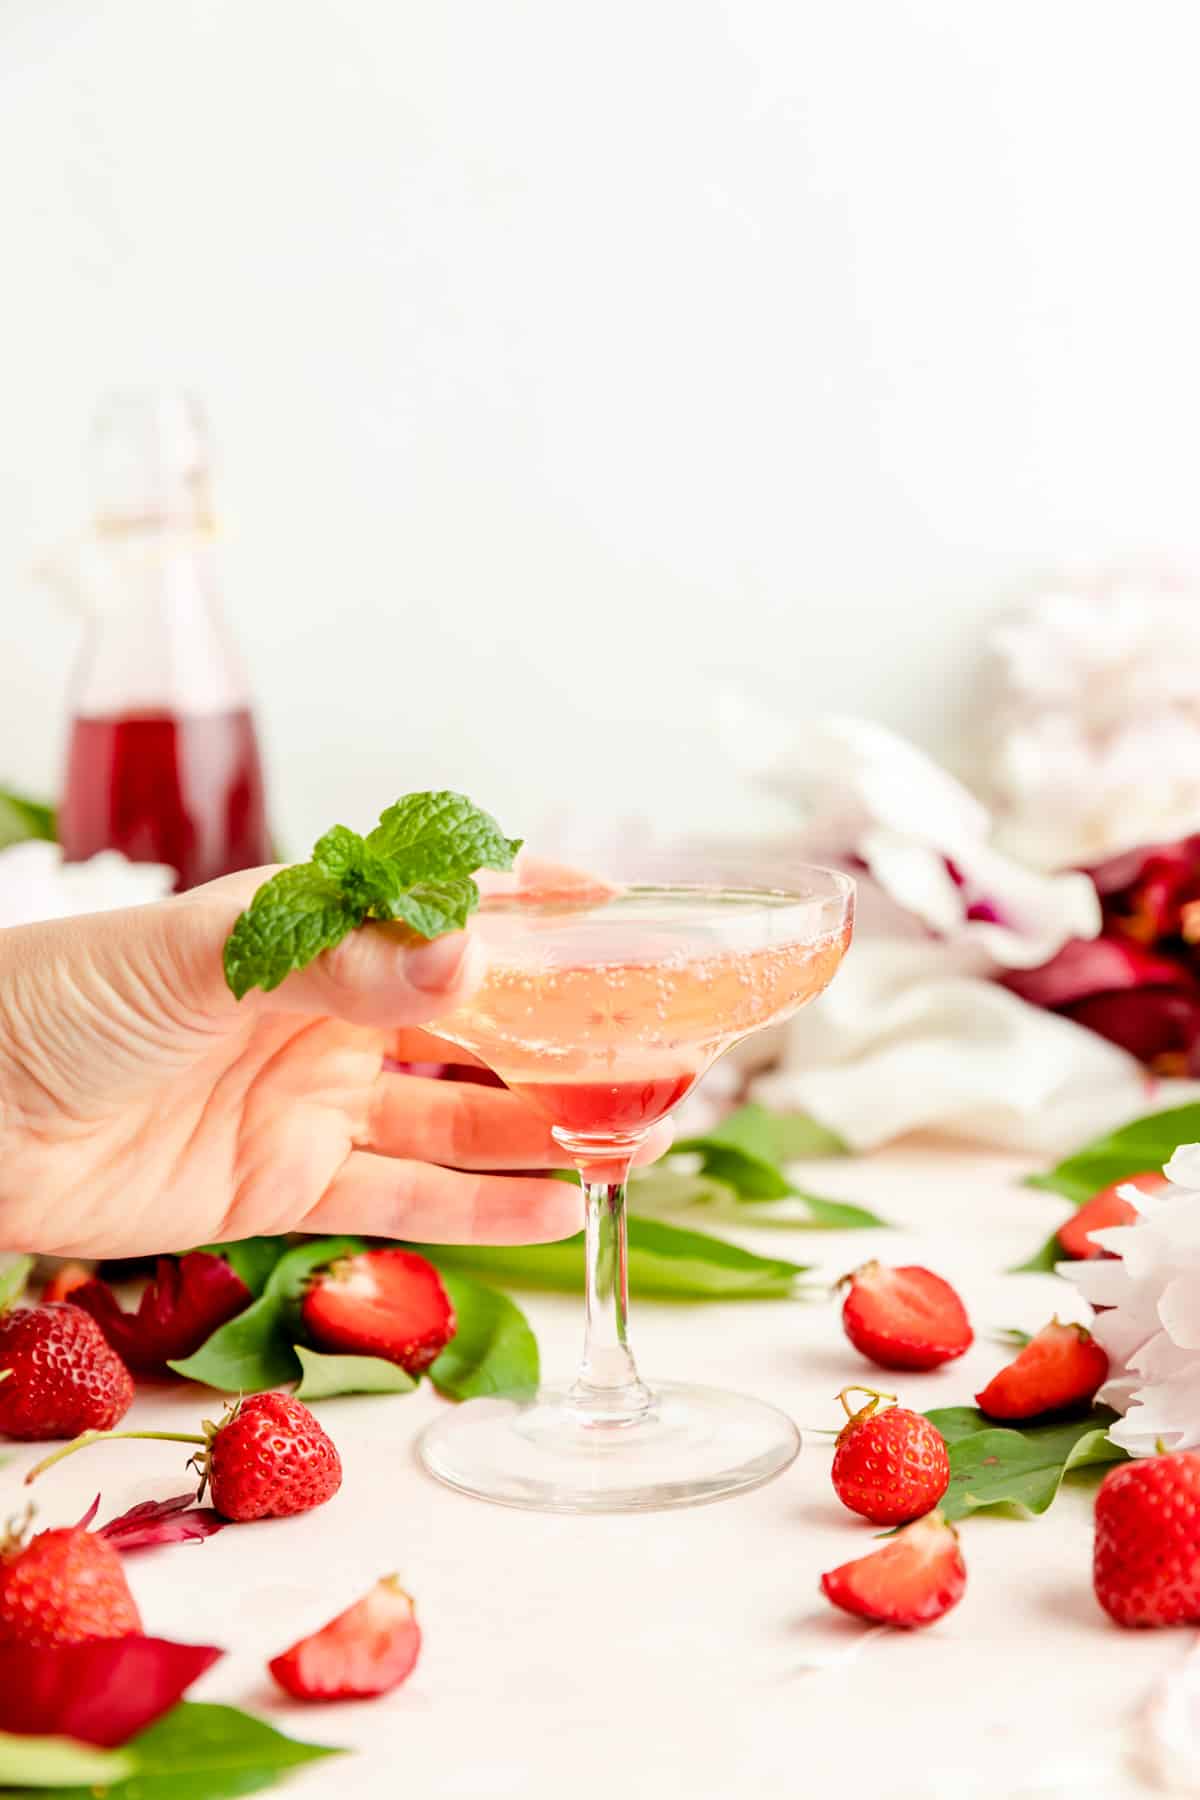 And grabbing pink and red cocktail glass with mint sprig on table with berries.